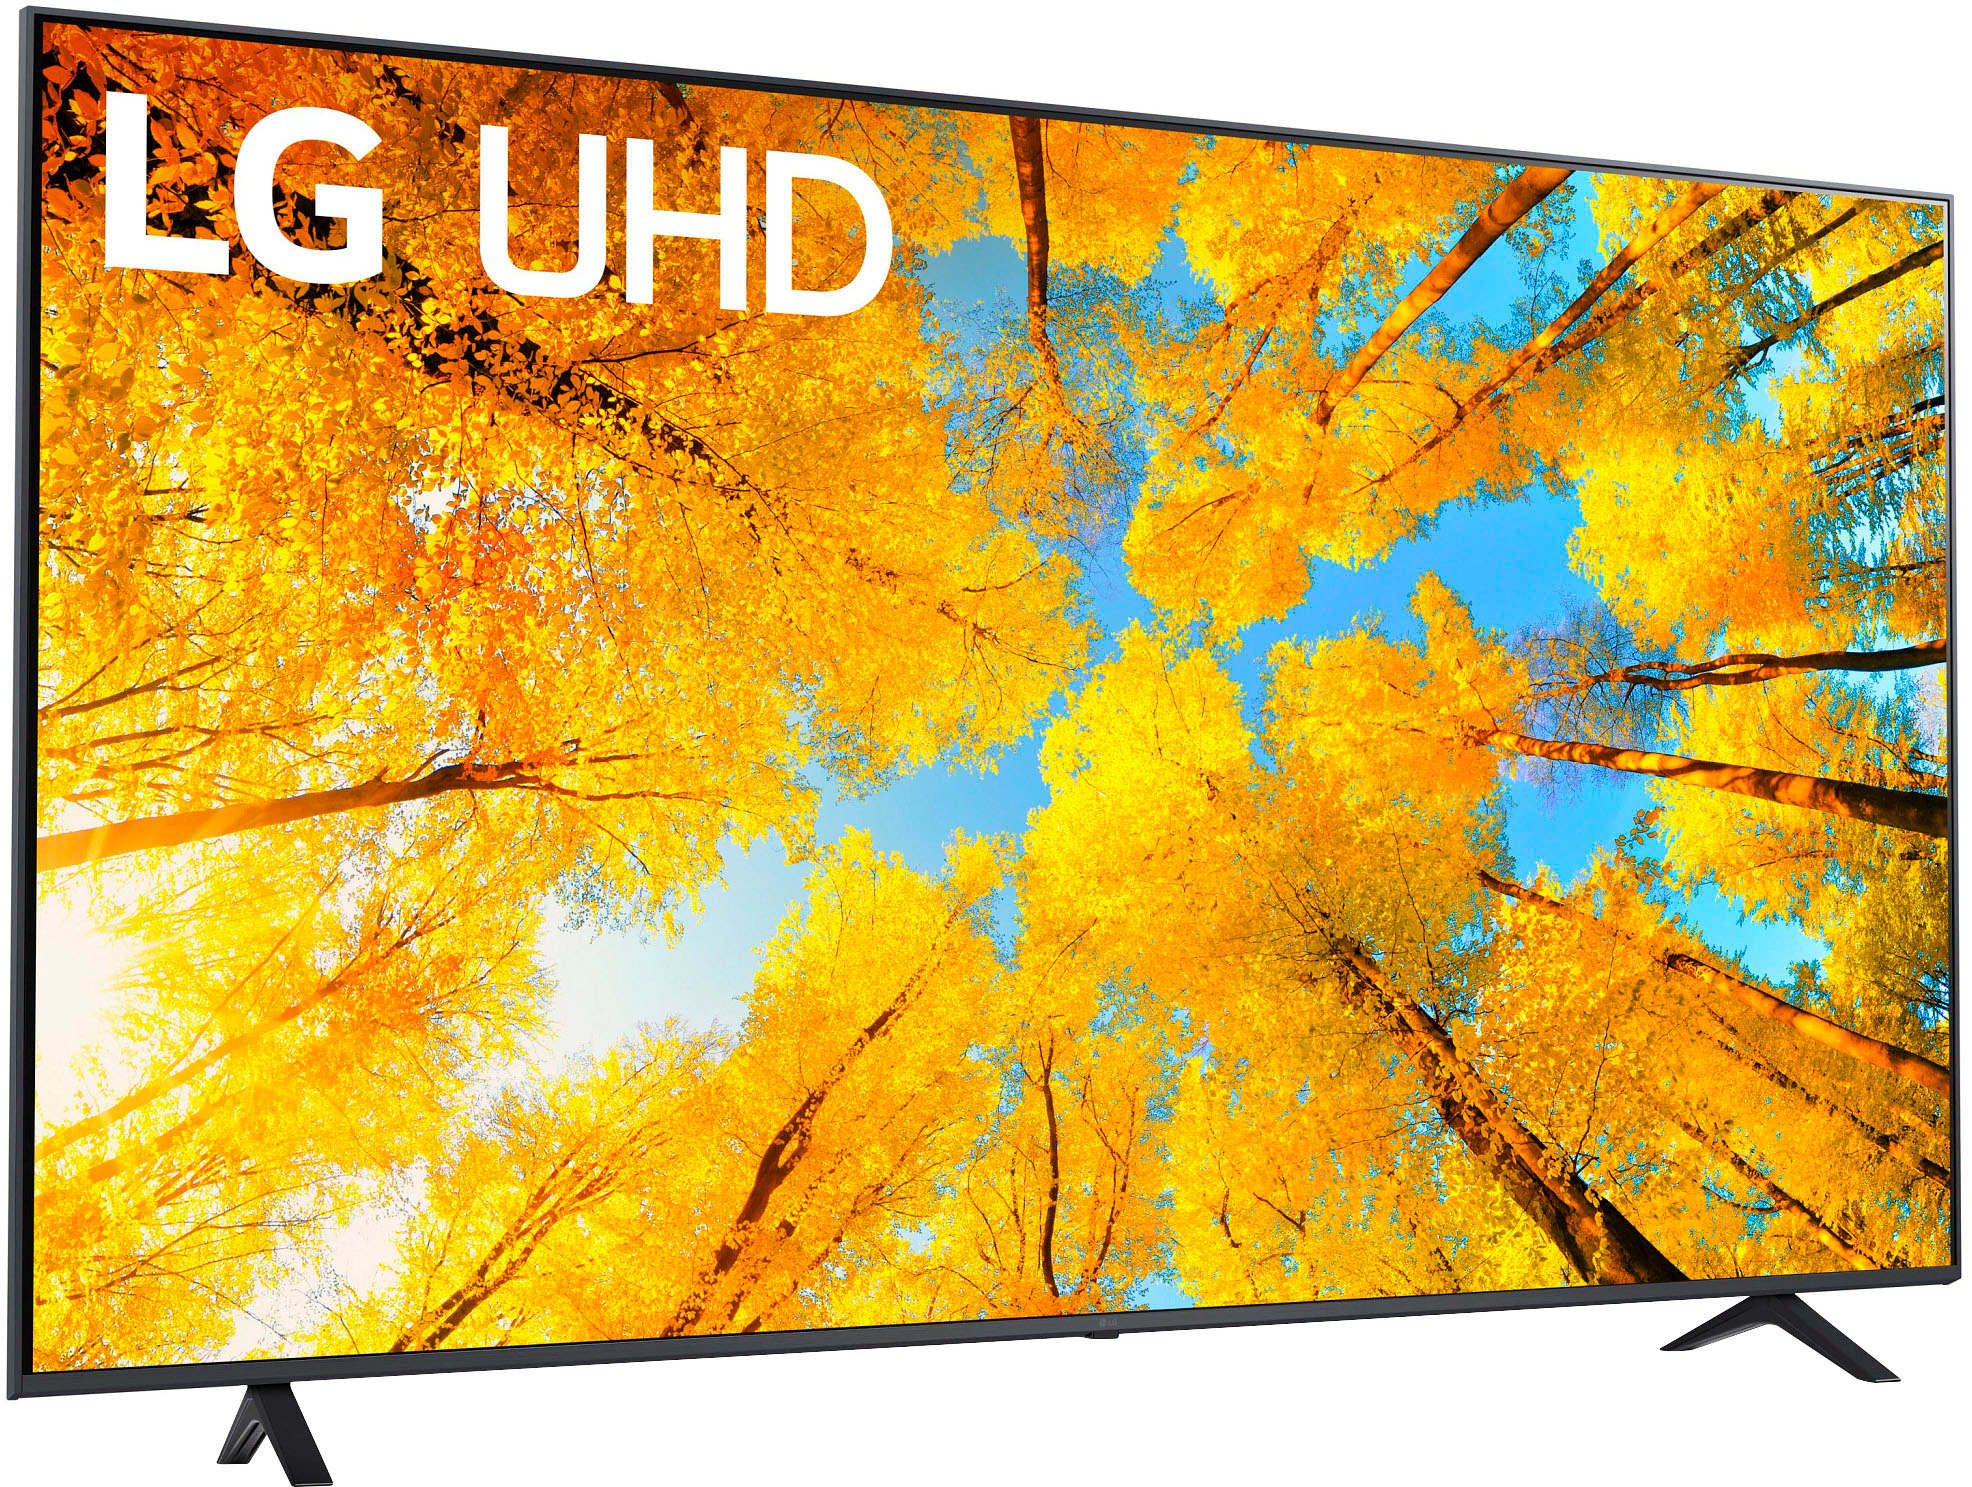 Back View: LG 75 inches Class 4K UHD 2160P WebOS22 Smart TV with Active HDR UQ7590 Series 75UQ7590PUB